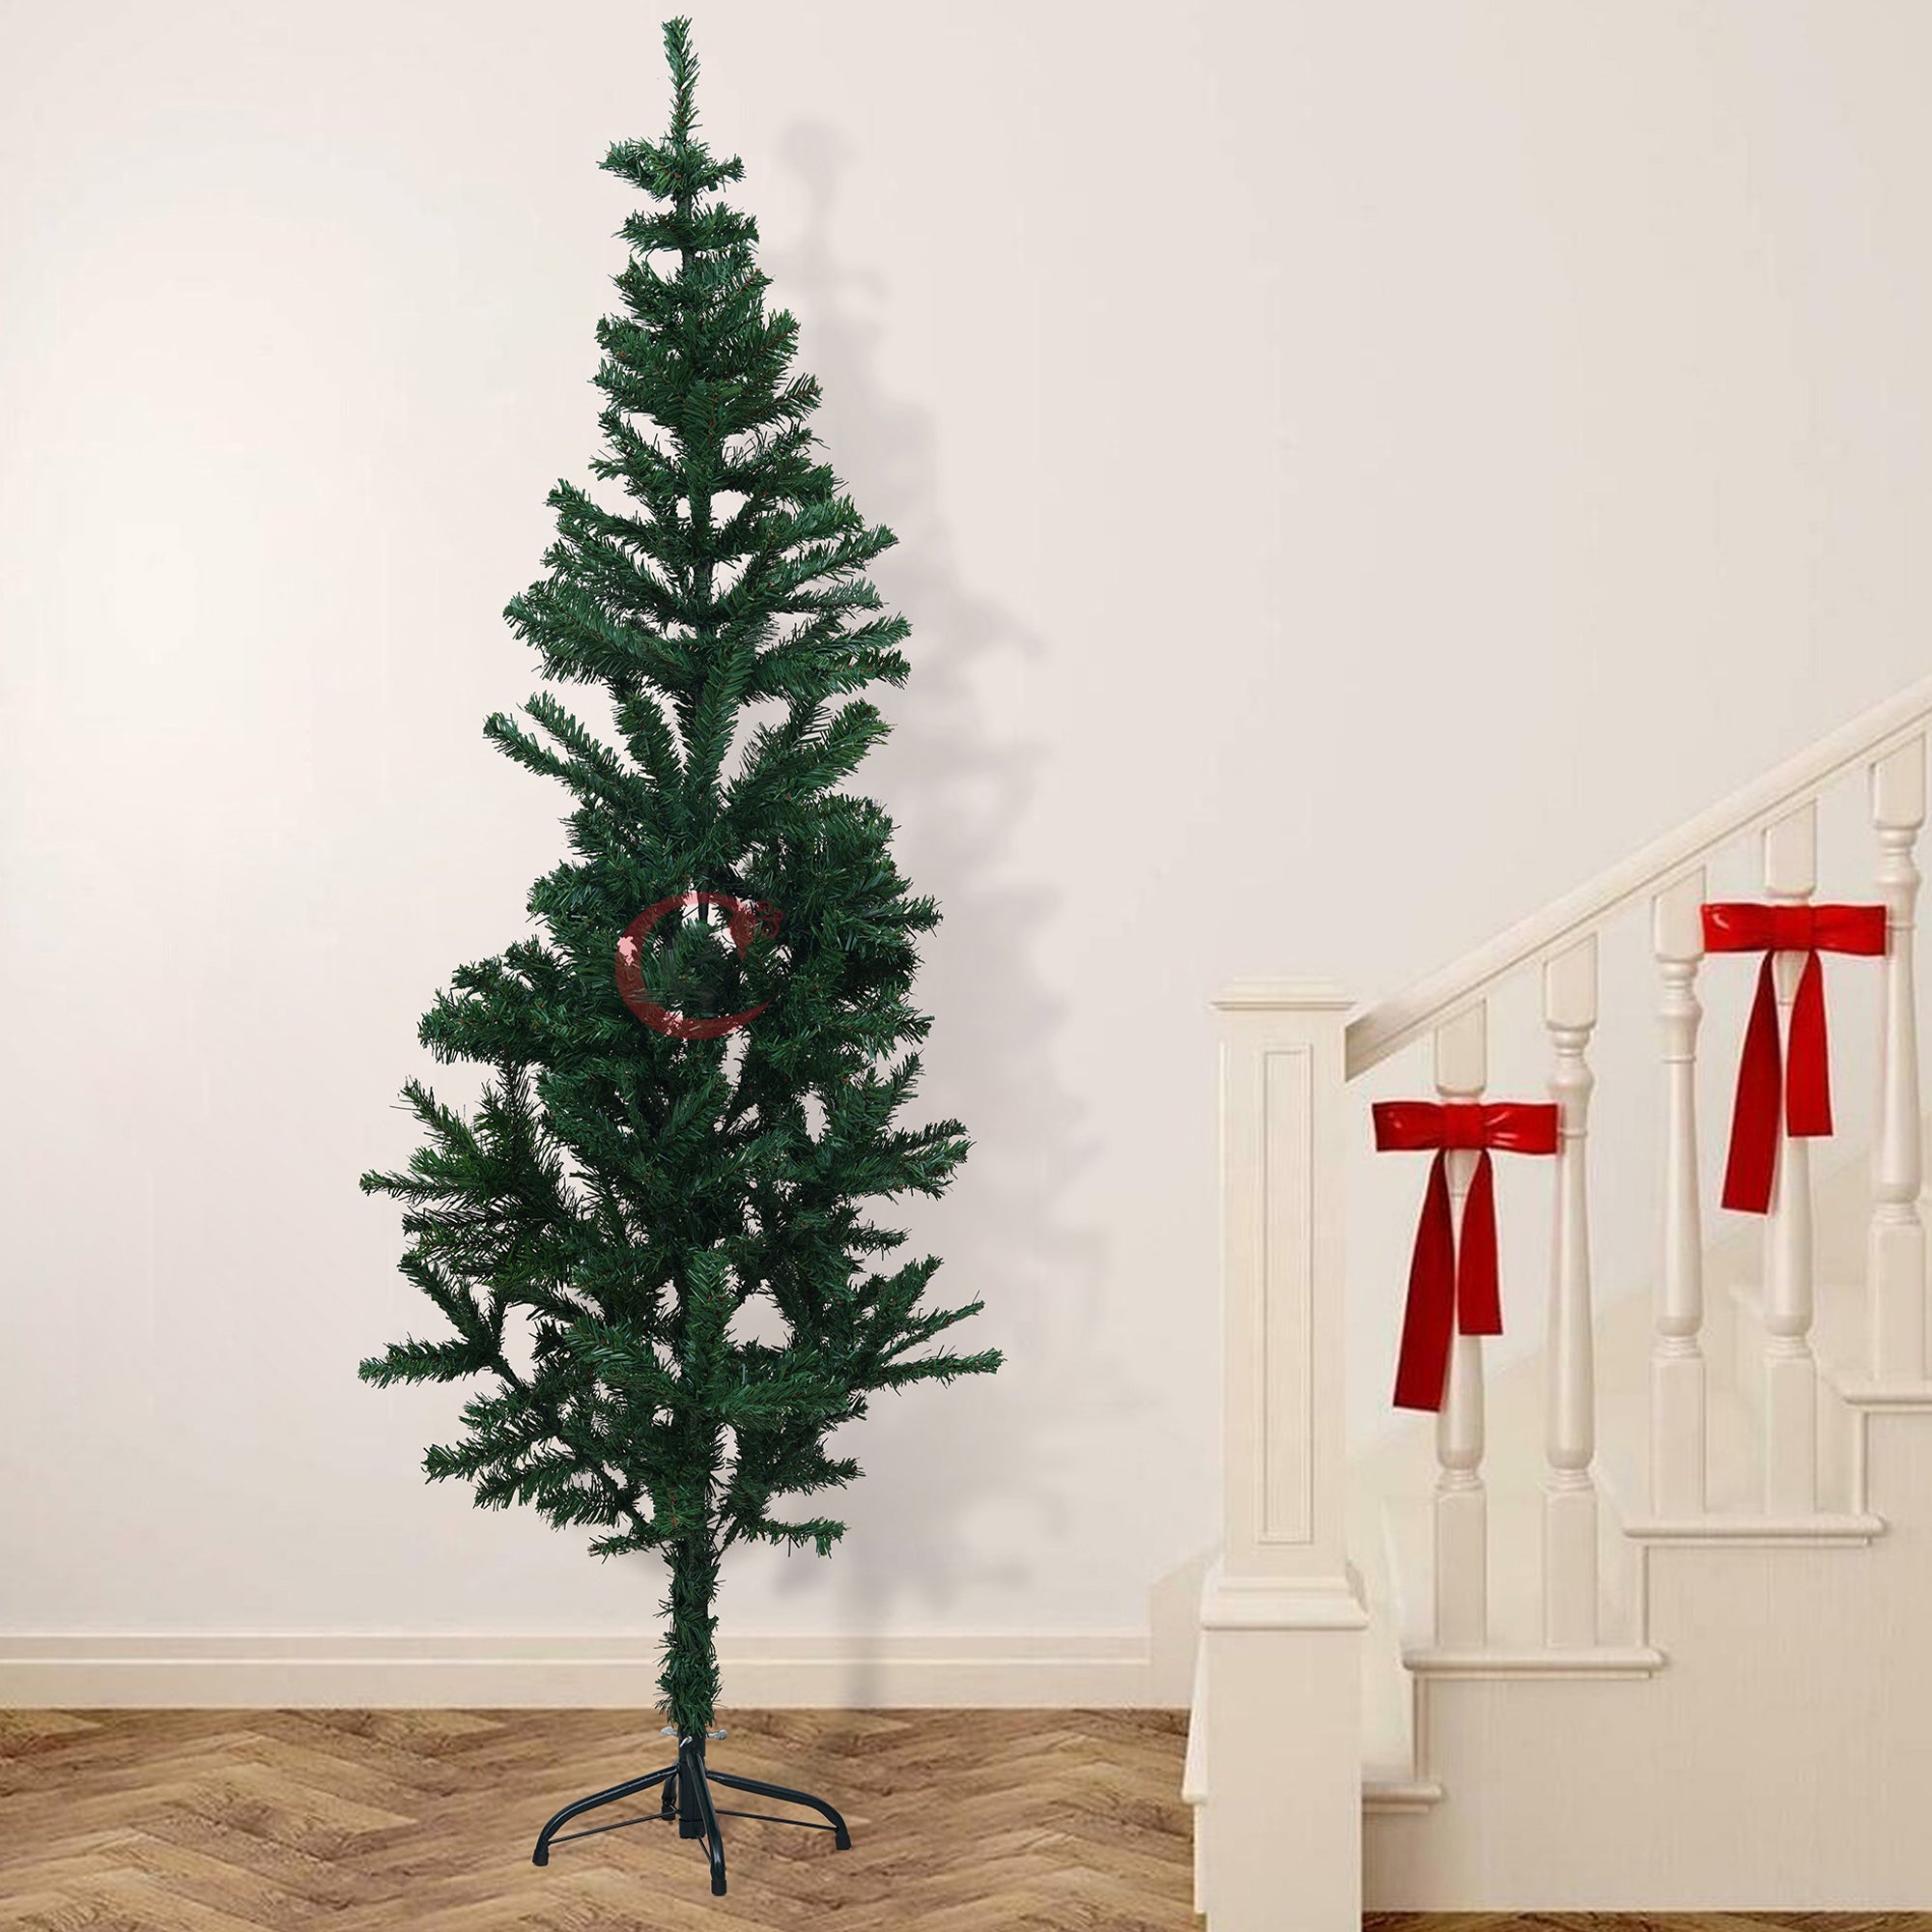 eCraftIndia 6 Feet Green Artificial Christmas Tree Xmas Pine Tree with Metal Stand - Xmas Tree for Indoor, Outdoor, Home, Living Room, Office, Church Decor - Merry Christmas Decoration Item 1